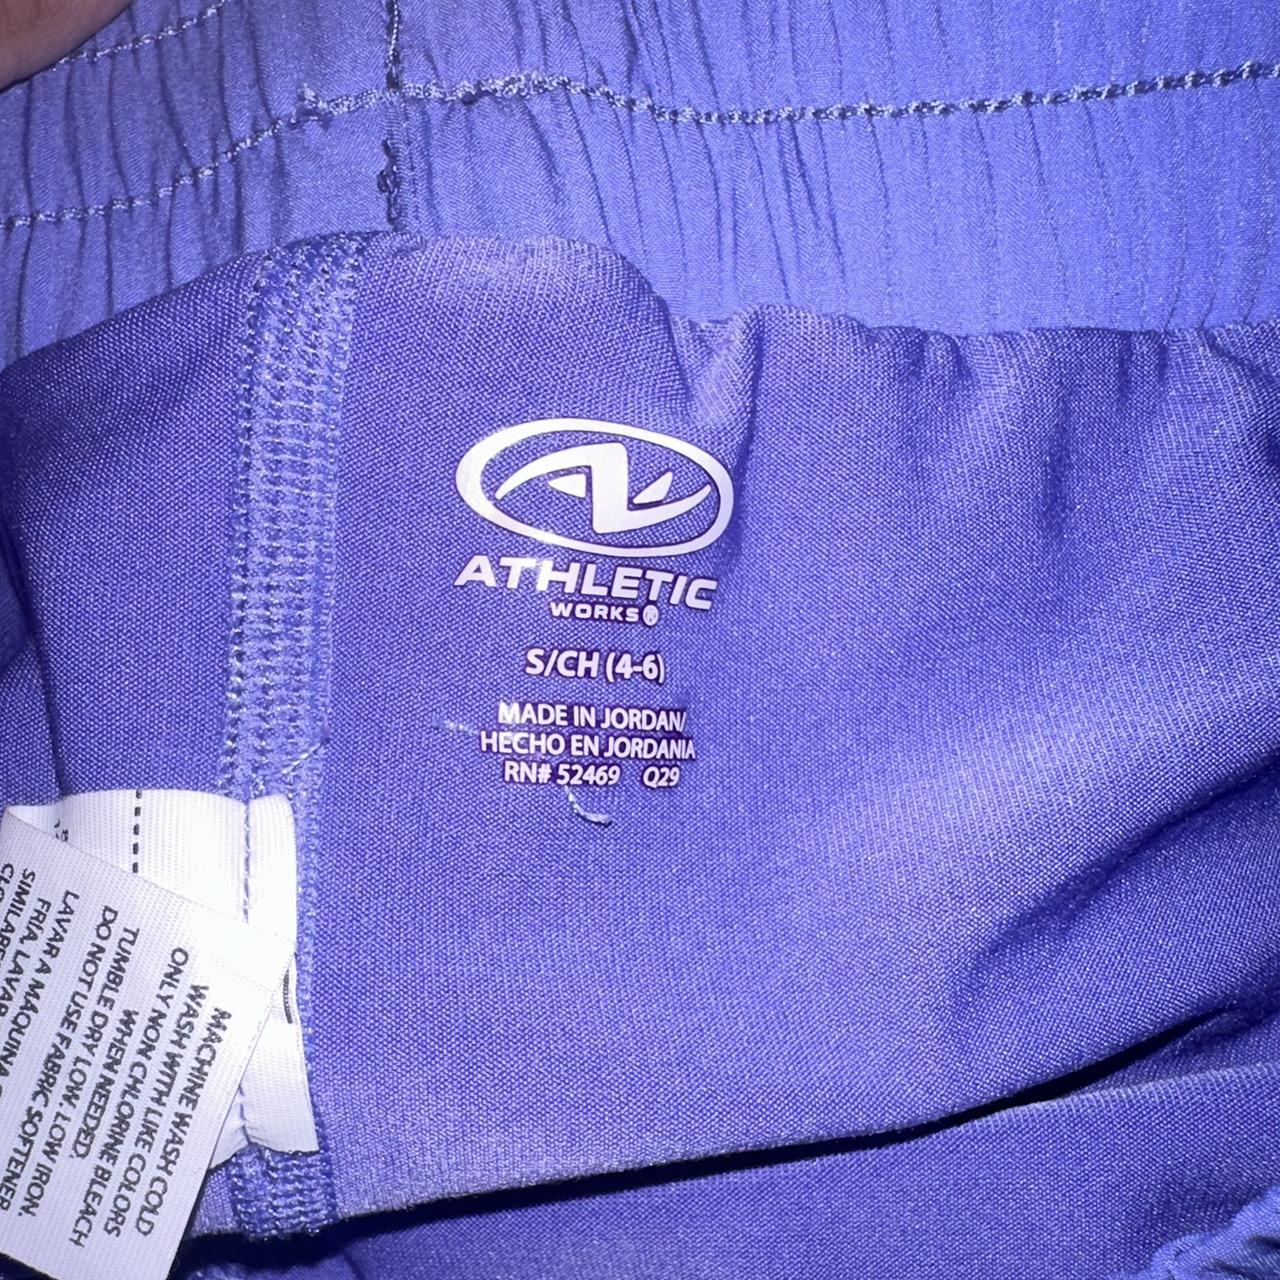 Athletic Works Women's Shorts (3)